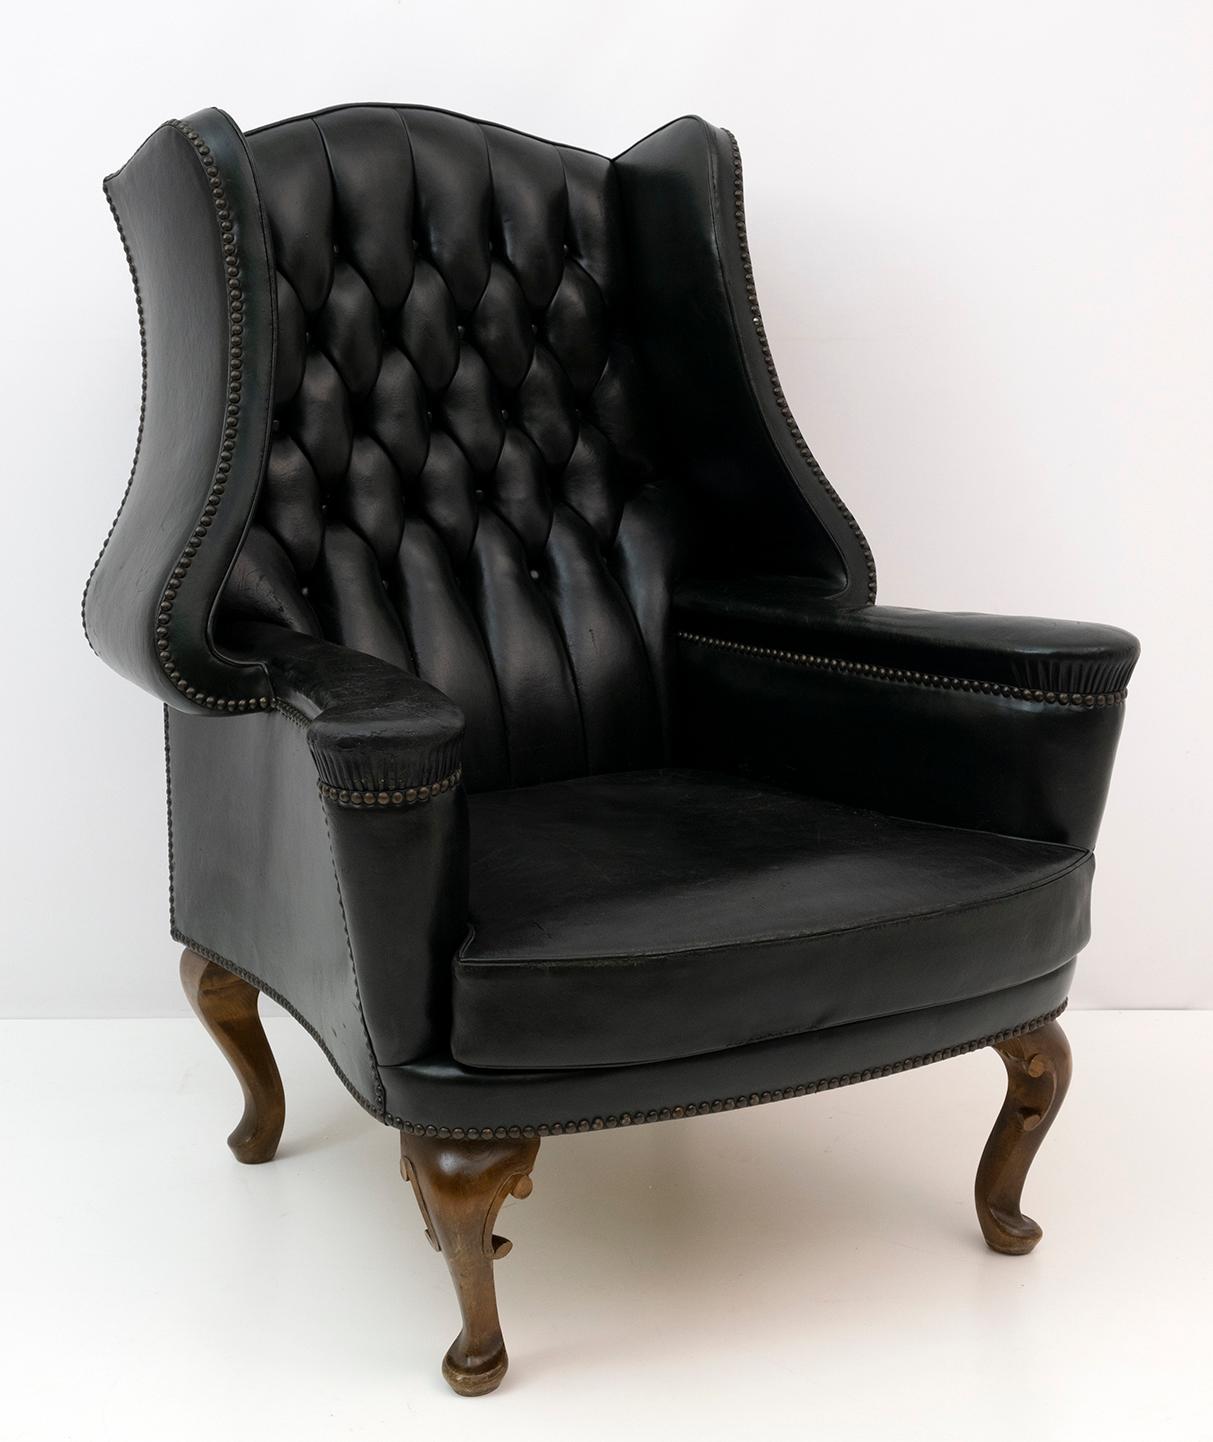 We are pleased to offer this rare and original Georgian style armchair for sale. A very beautiful collectible and decorative armchair. It is made according to the early Gothic designs which were solid wood, this is a later adaptation in the Georgian